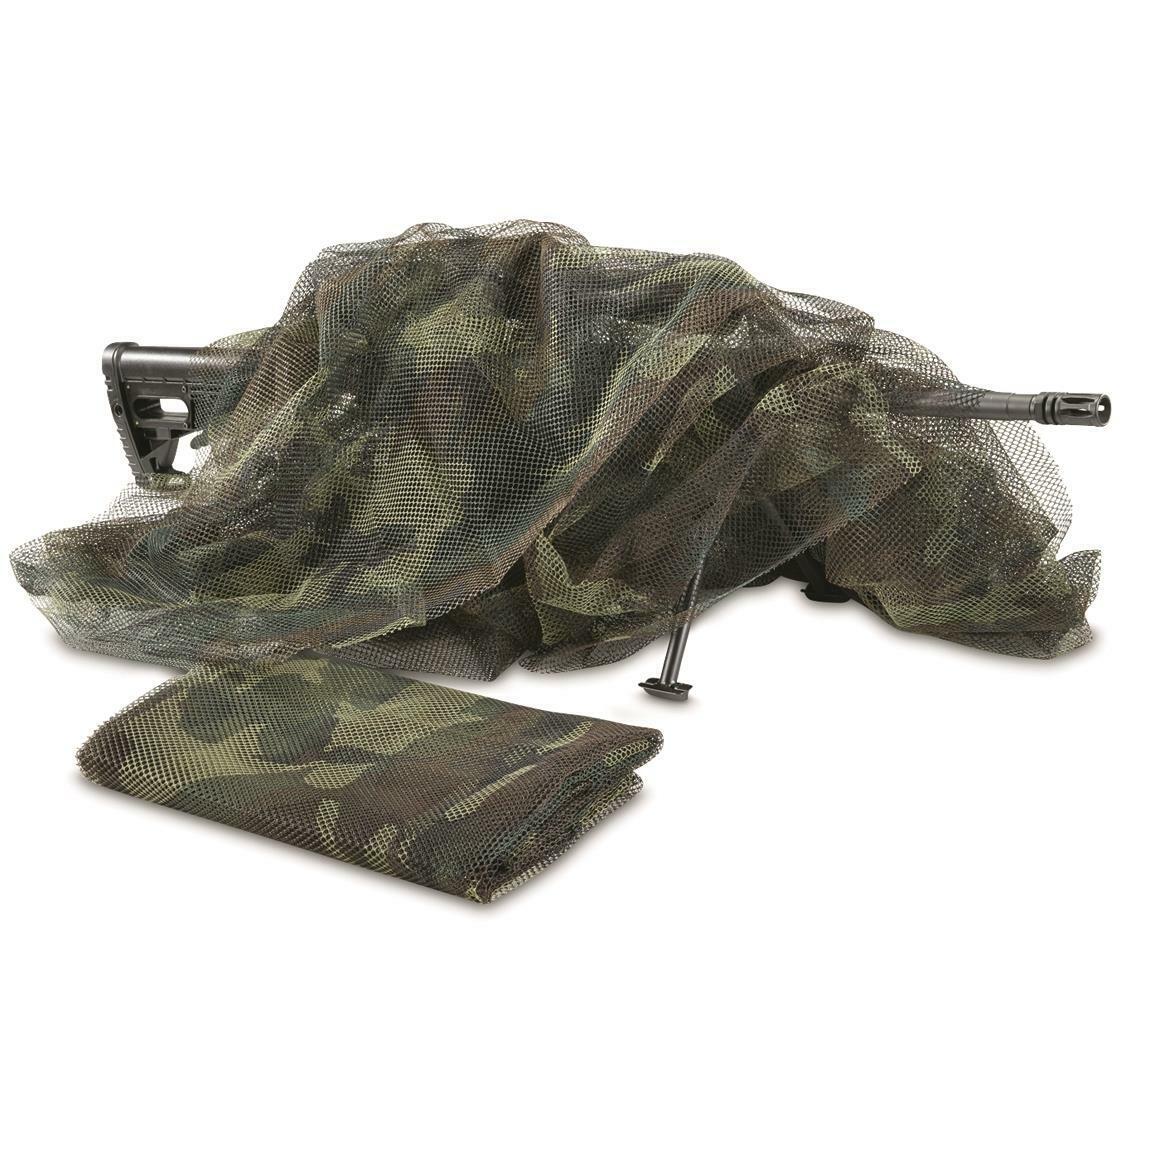 Military Woodland Sniper Veil - Army Mesh Camo Netting - Made in USA - 5\' x 8\'